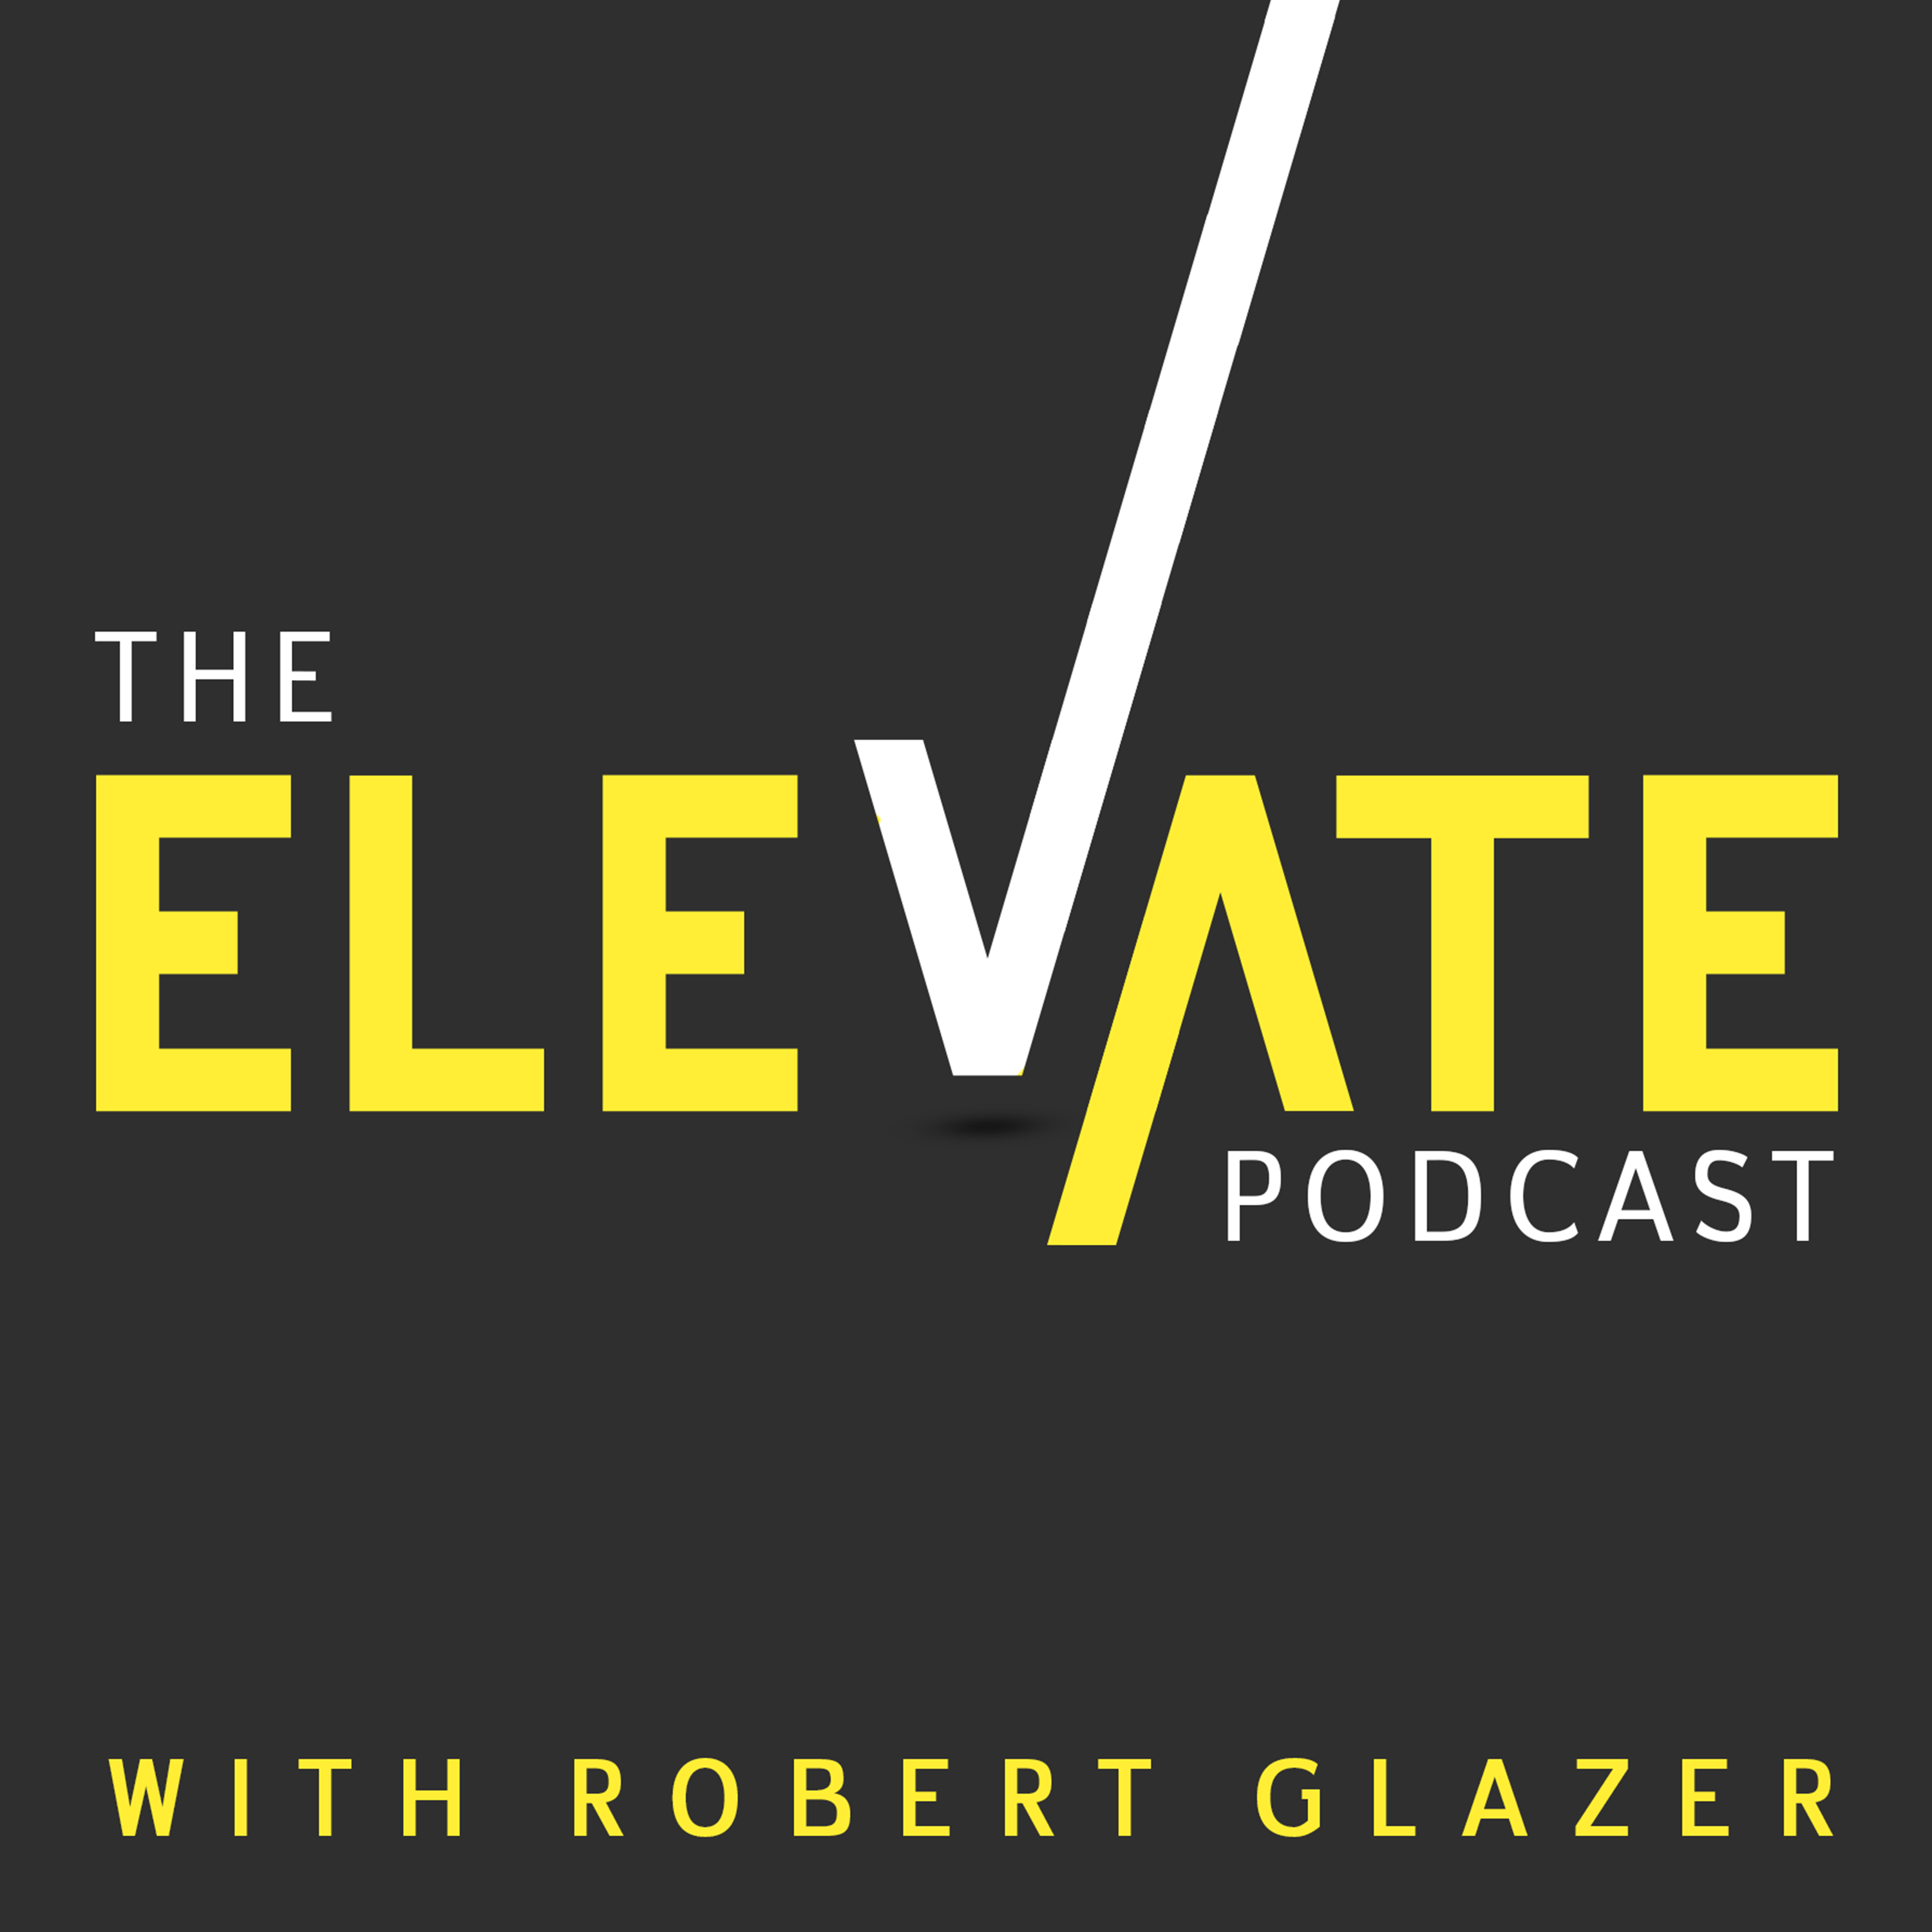 The-Elevate-Podcast